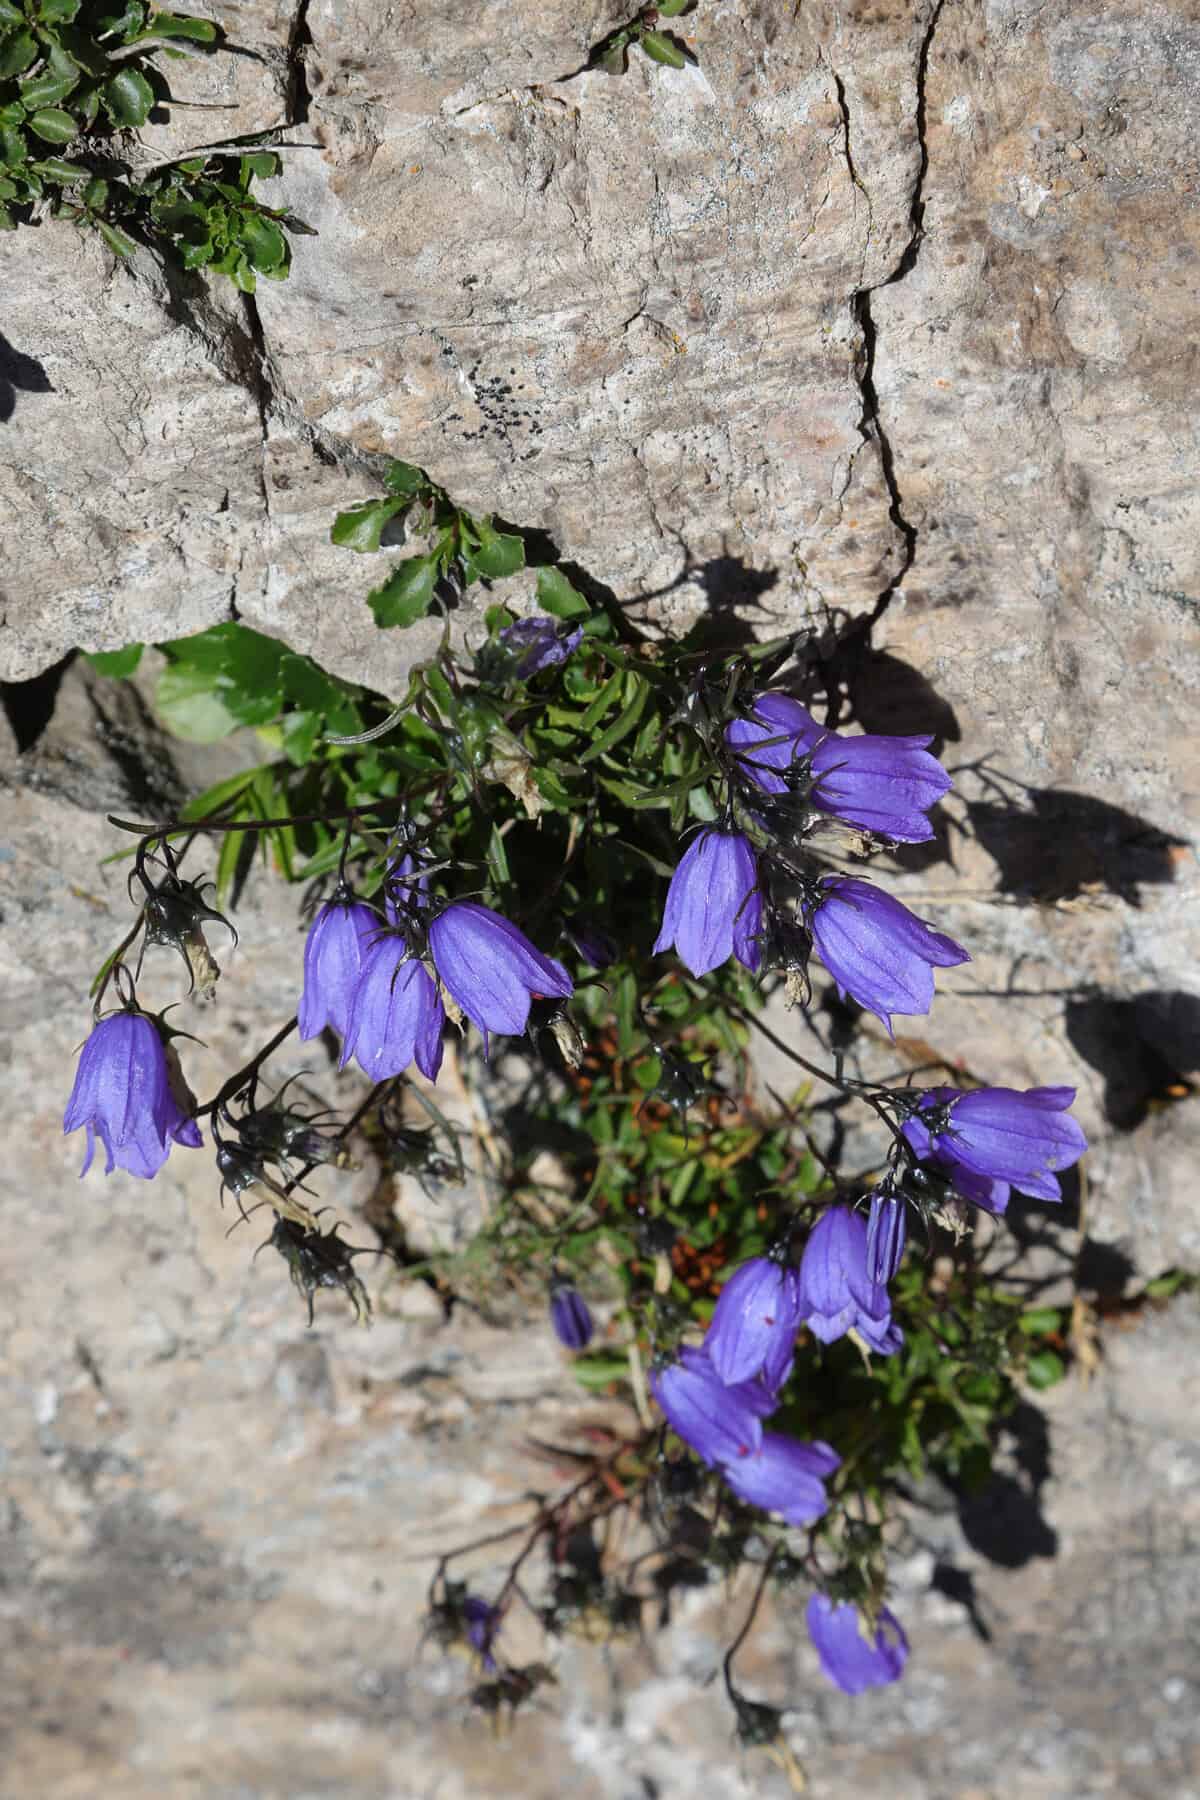 Group of blue bellflower called campanula cochlearfiifolia on the rock in mountains.